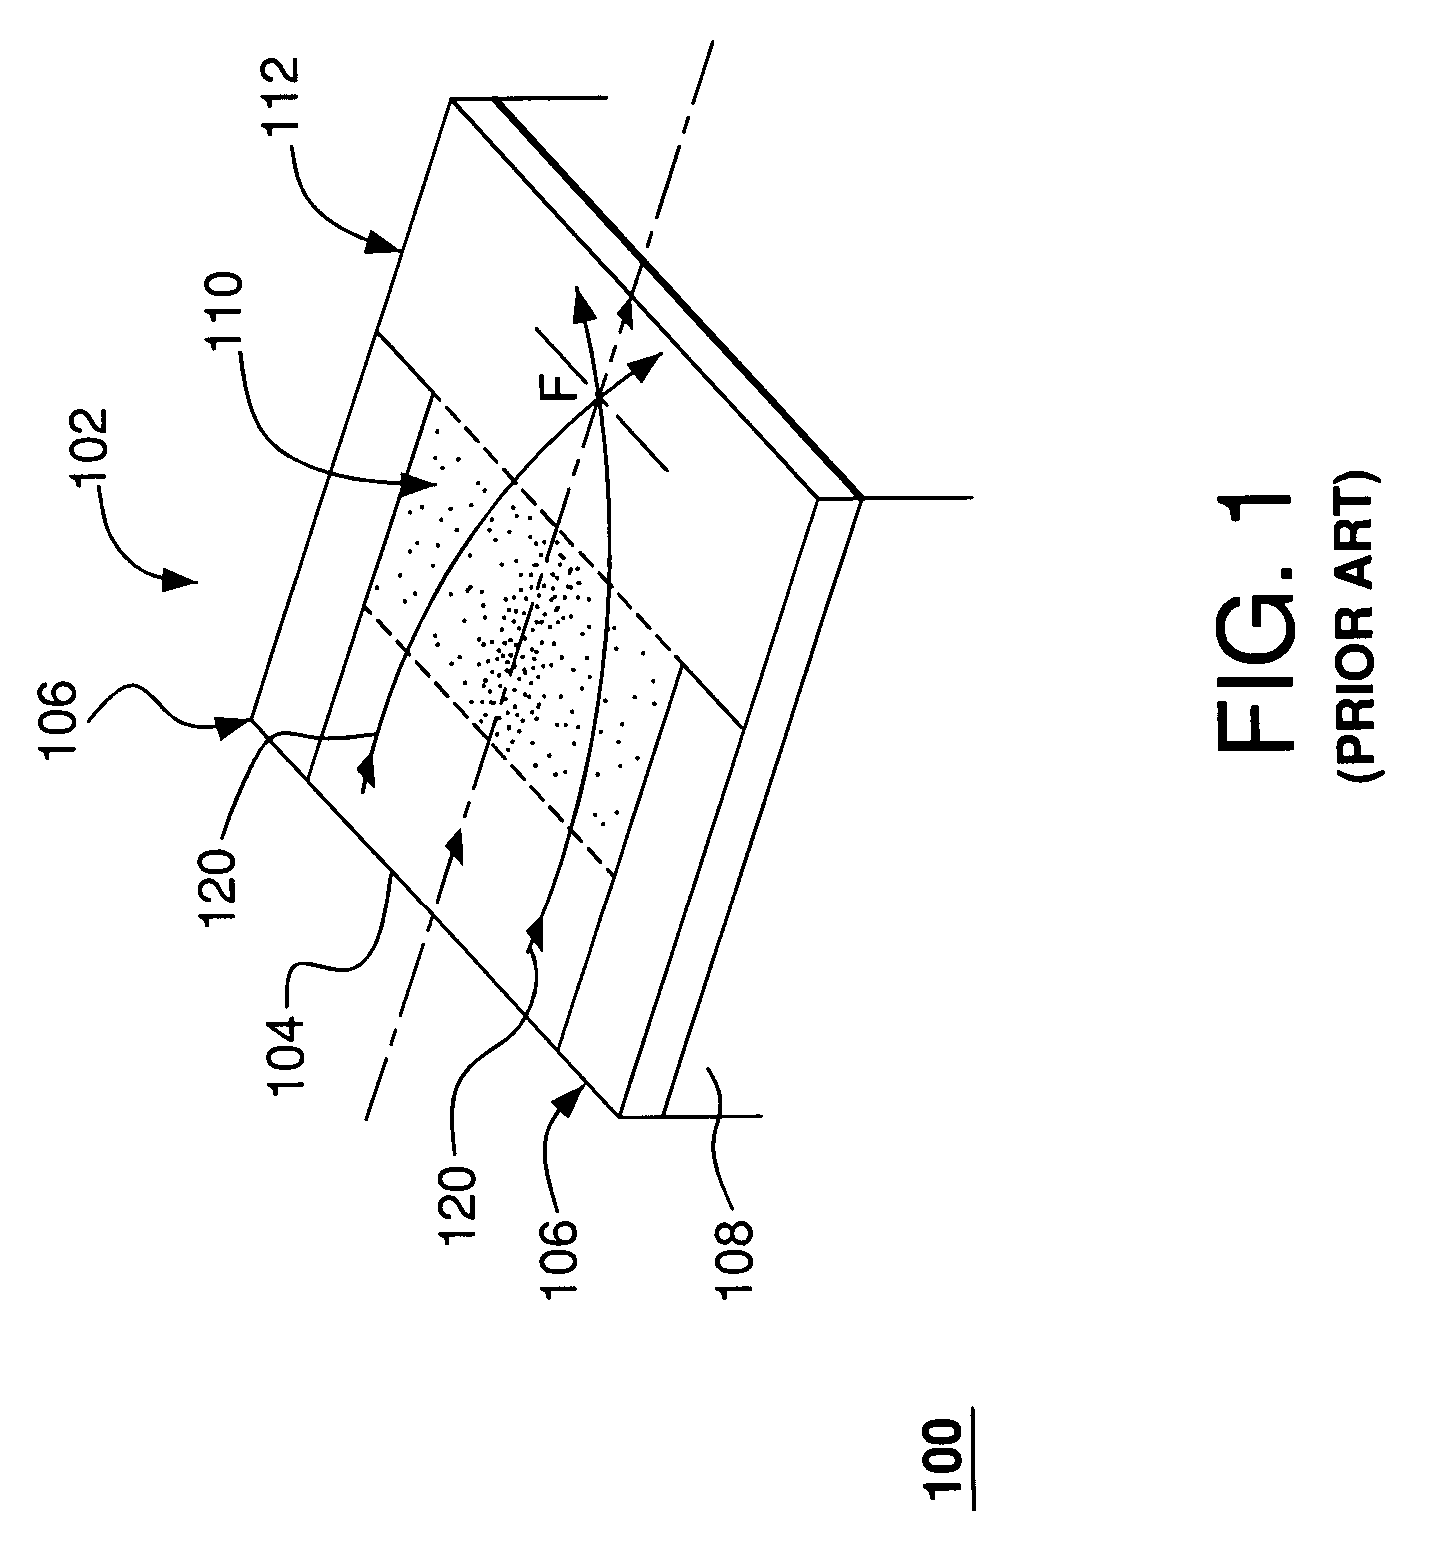 Optical device having a waveguide lens with multimode interference